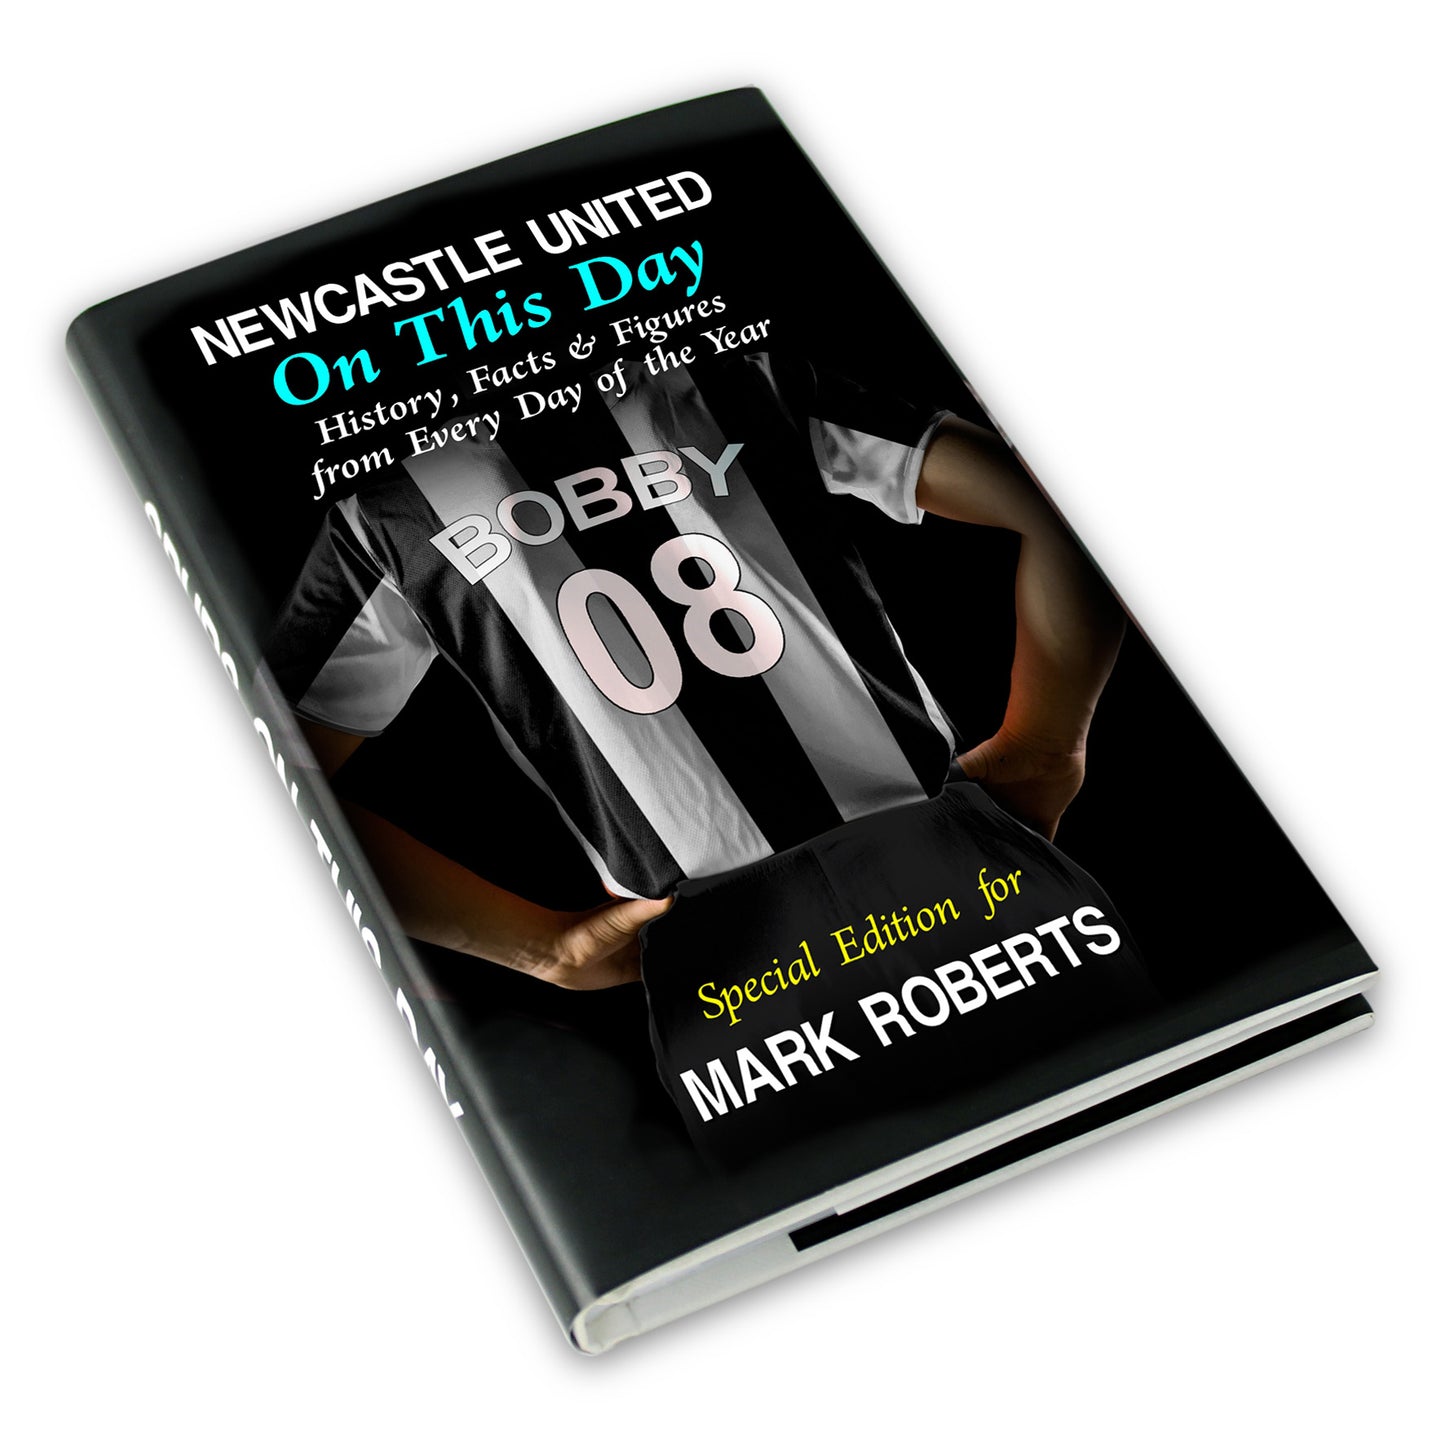 Personalised Newcastle United on this Day Book